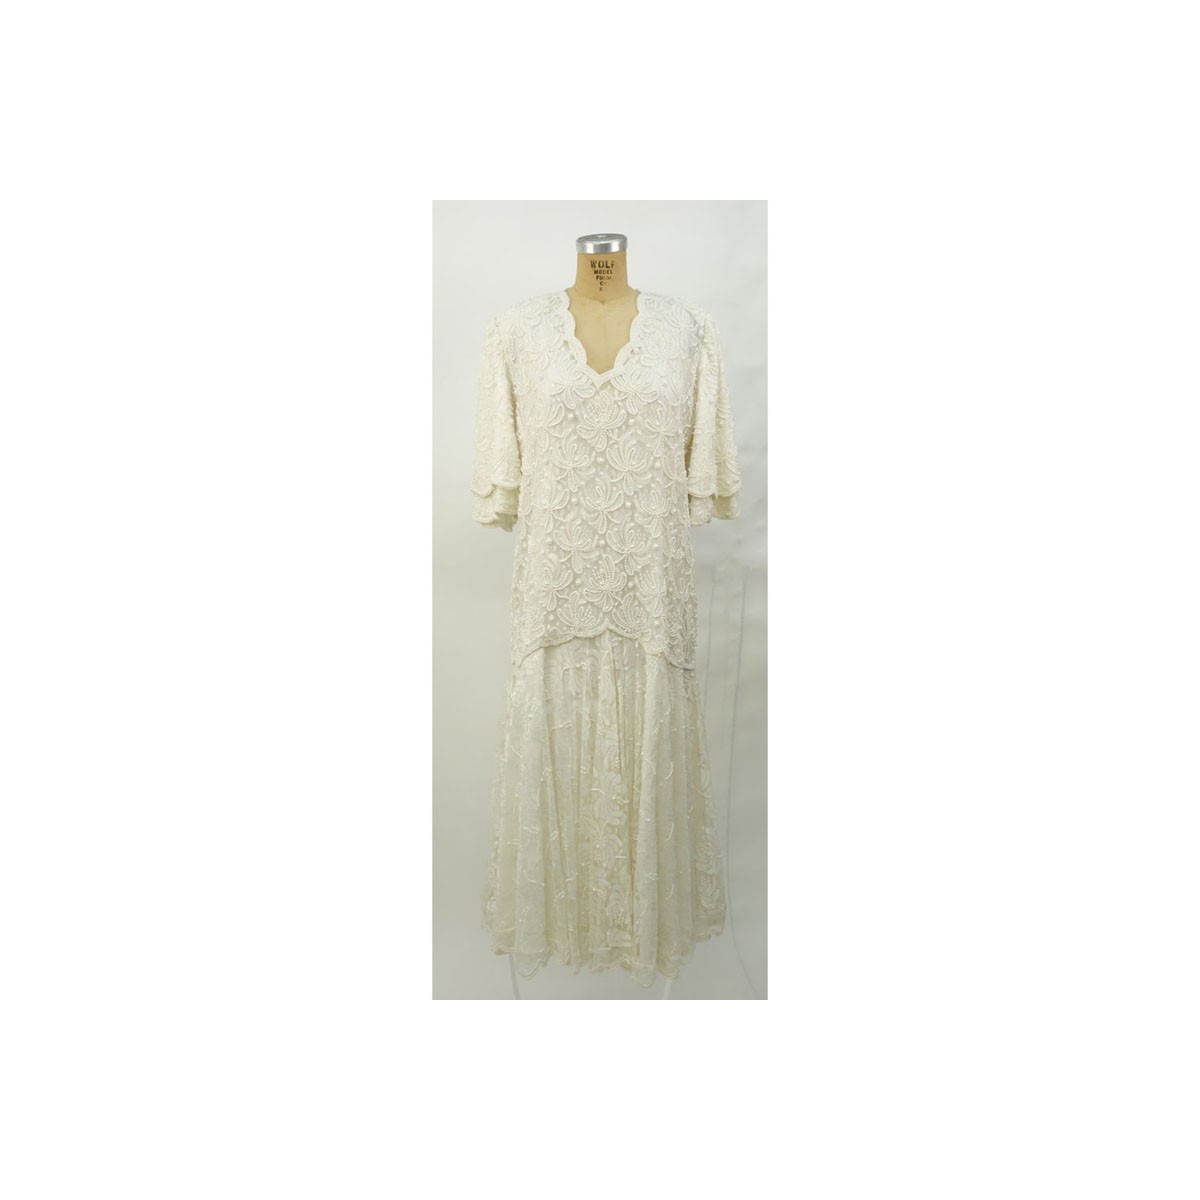 Vintage Ivory Color Beaded and Sequined Evening Dress. Some stain